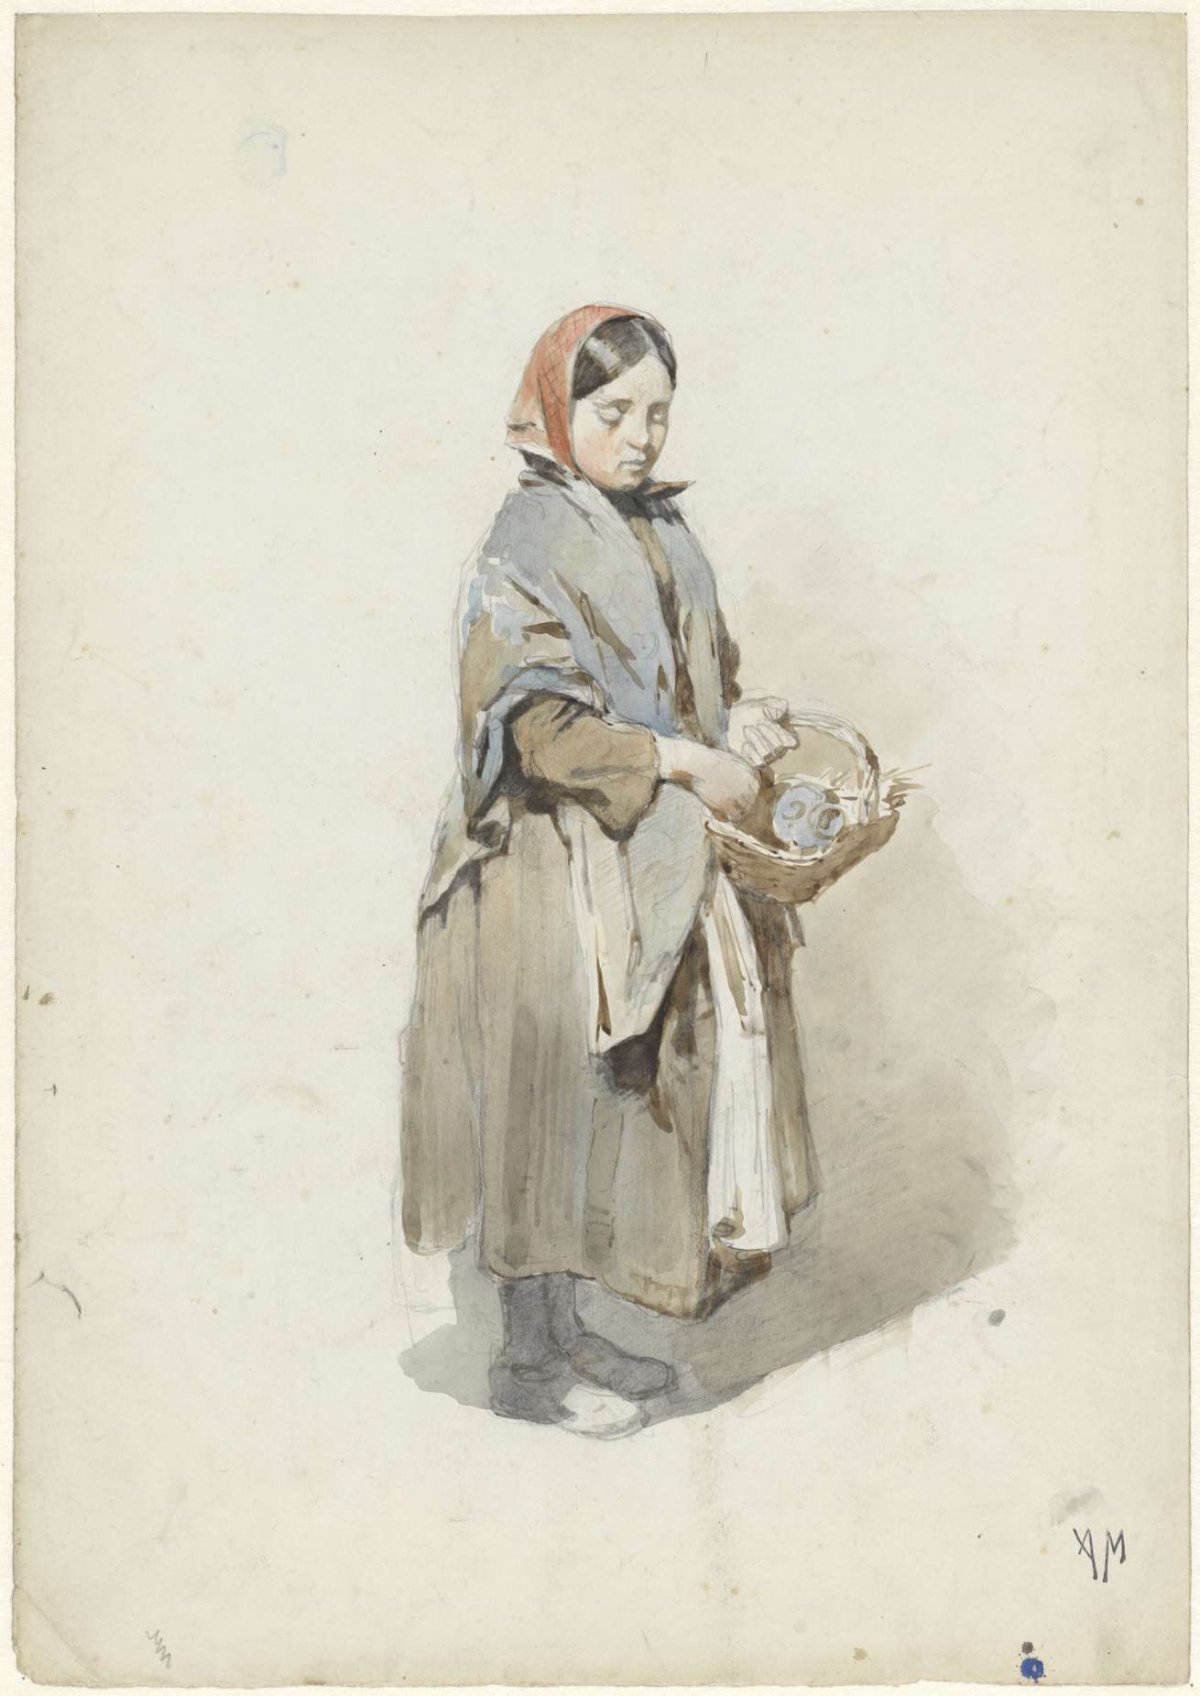 Standing woman with headscarf and basket, Anton Mauve, 1848 - 1888